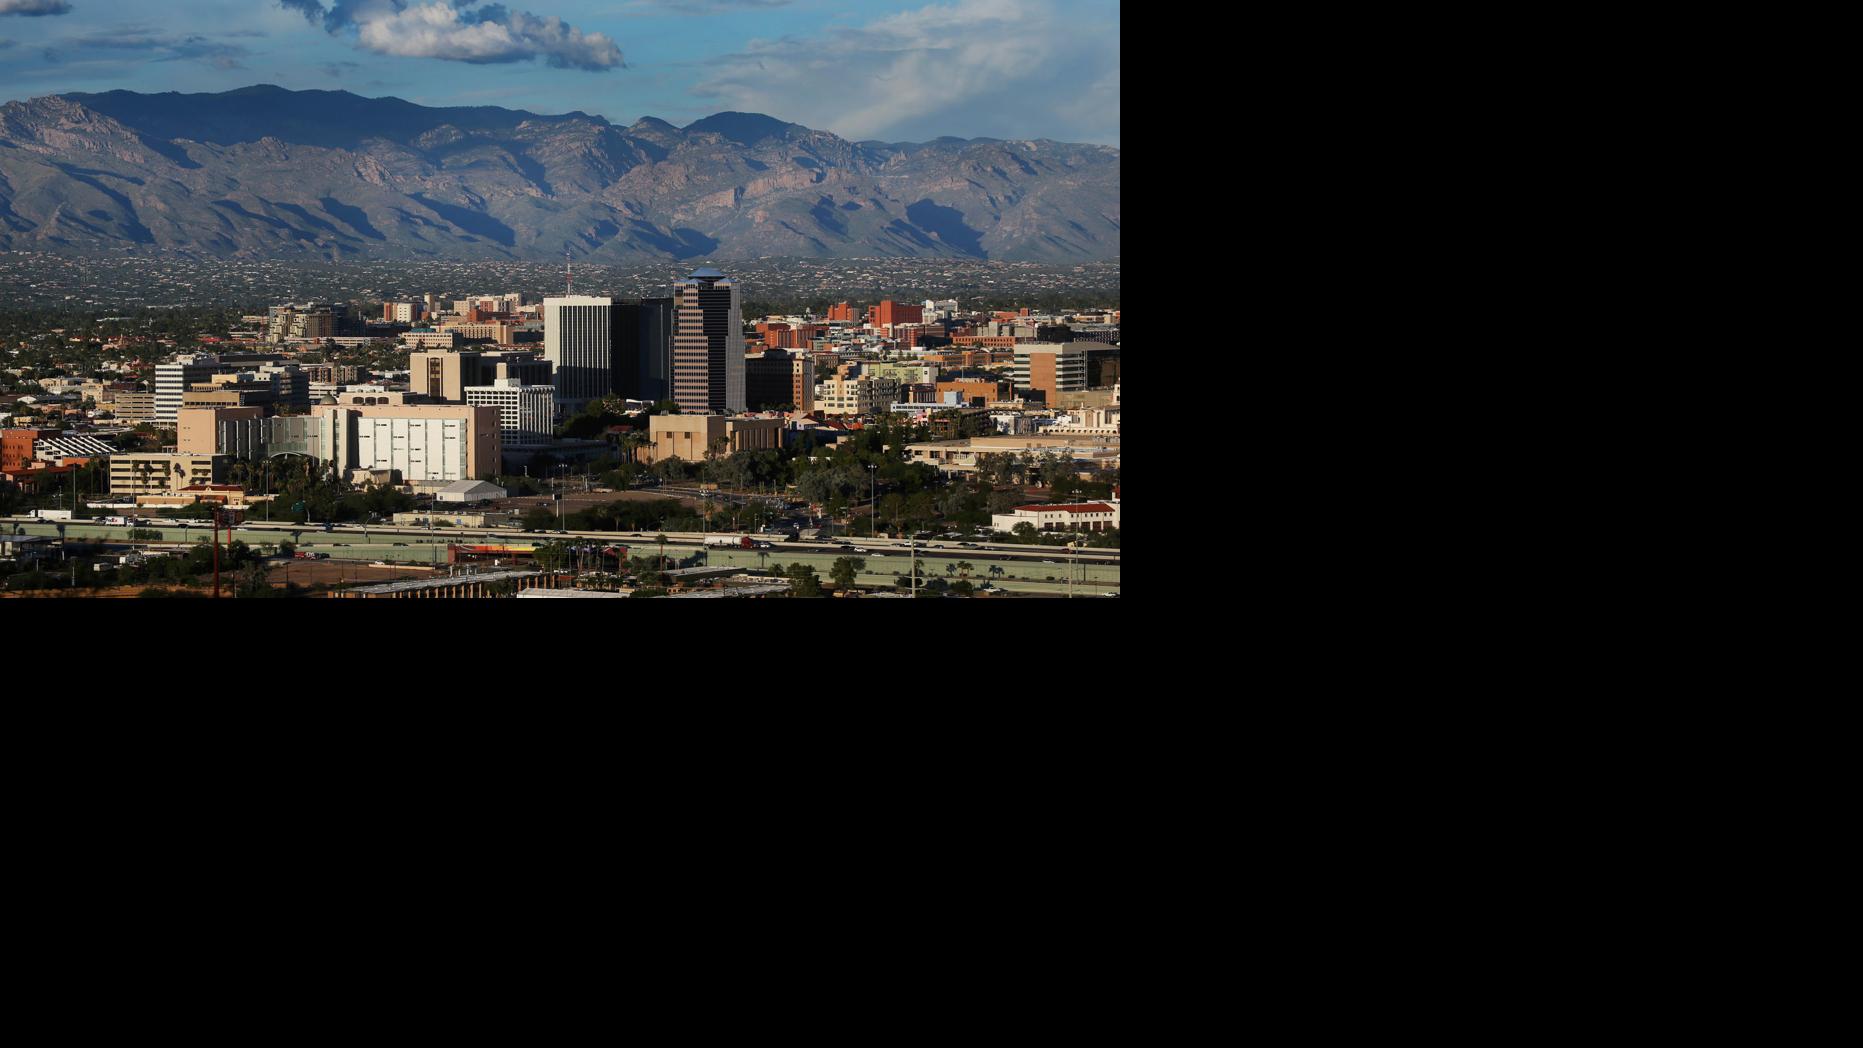 Tucson is a prime place to be during coronavirus pandemic